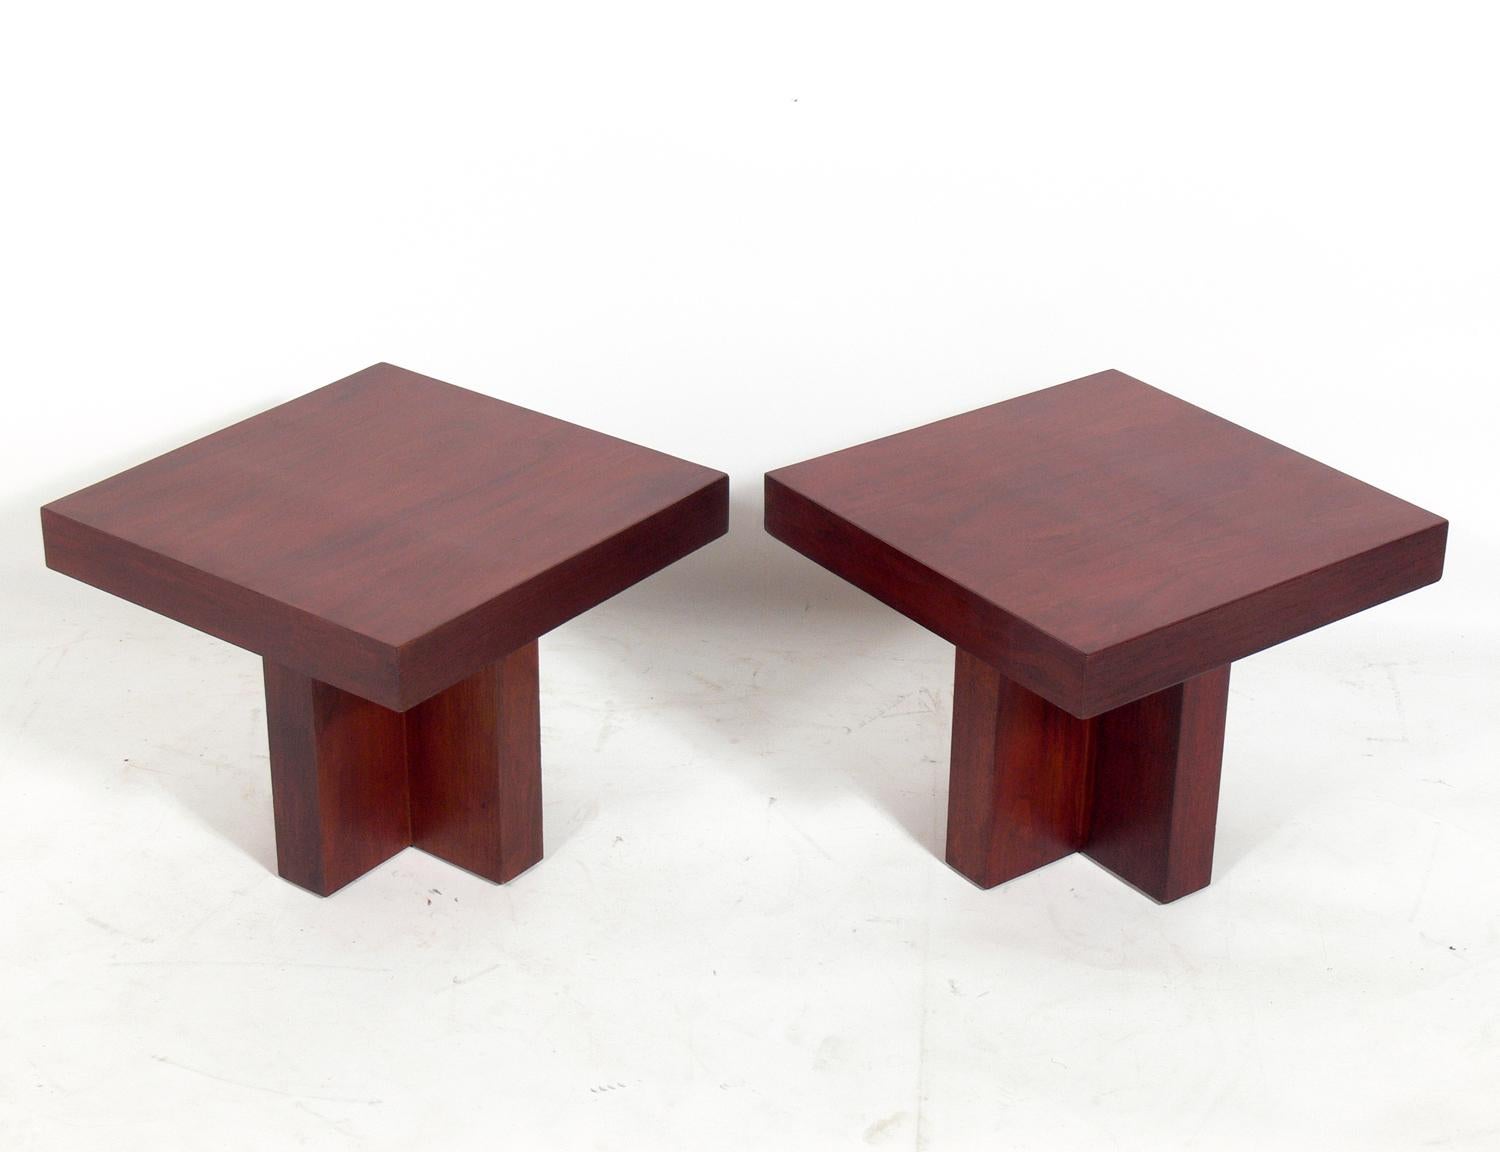 Pair of clean lined walnut end tables, in the style of  Milo Baughman, American, circa 1960s. These tables have a clean lined architectural design and can be used as end or side tables, nightstands, or pushed together to be used as a coffee table.